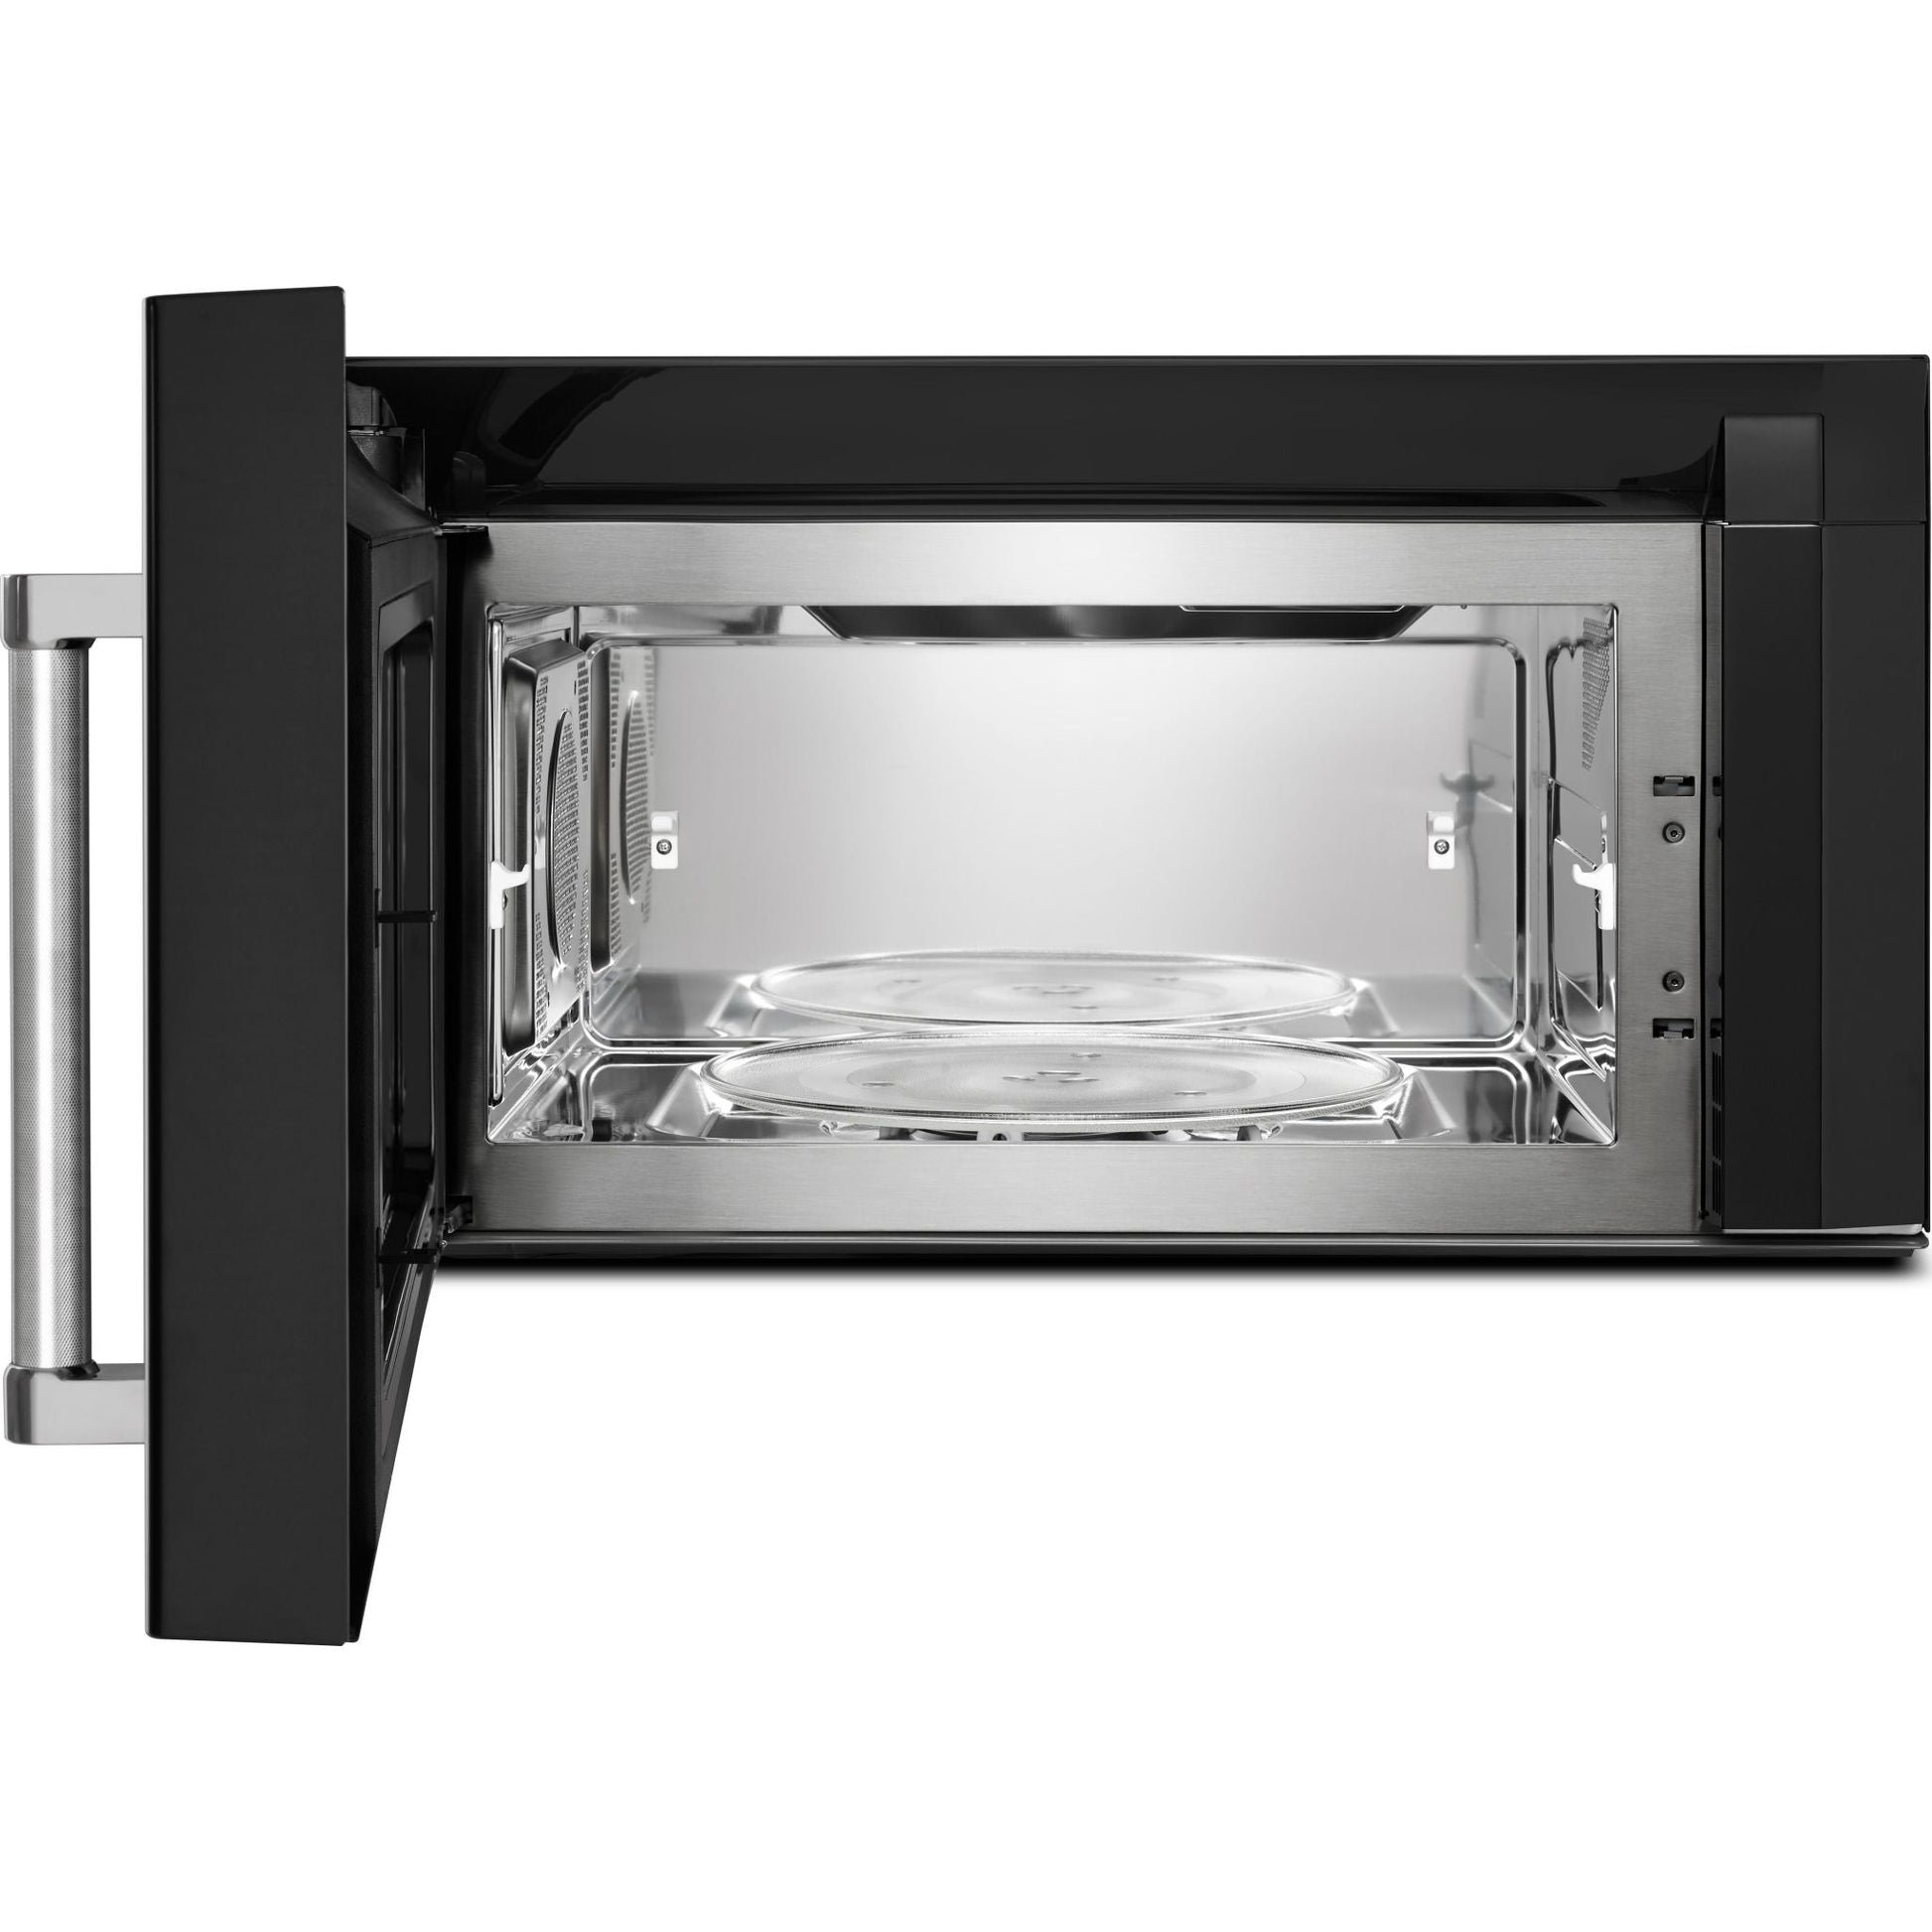 KitchenAid Over the Range Microwave (YKMHC319EBS) - Black Stainless